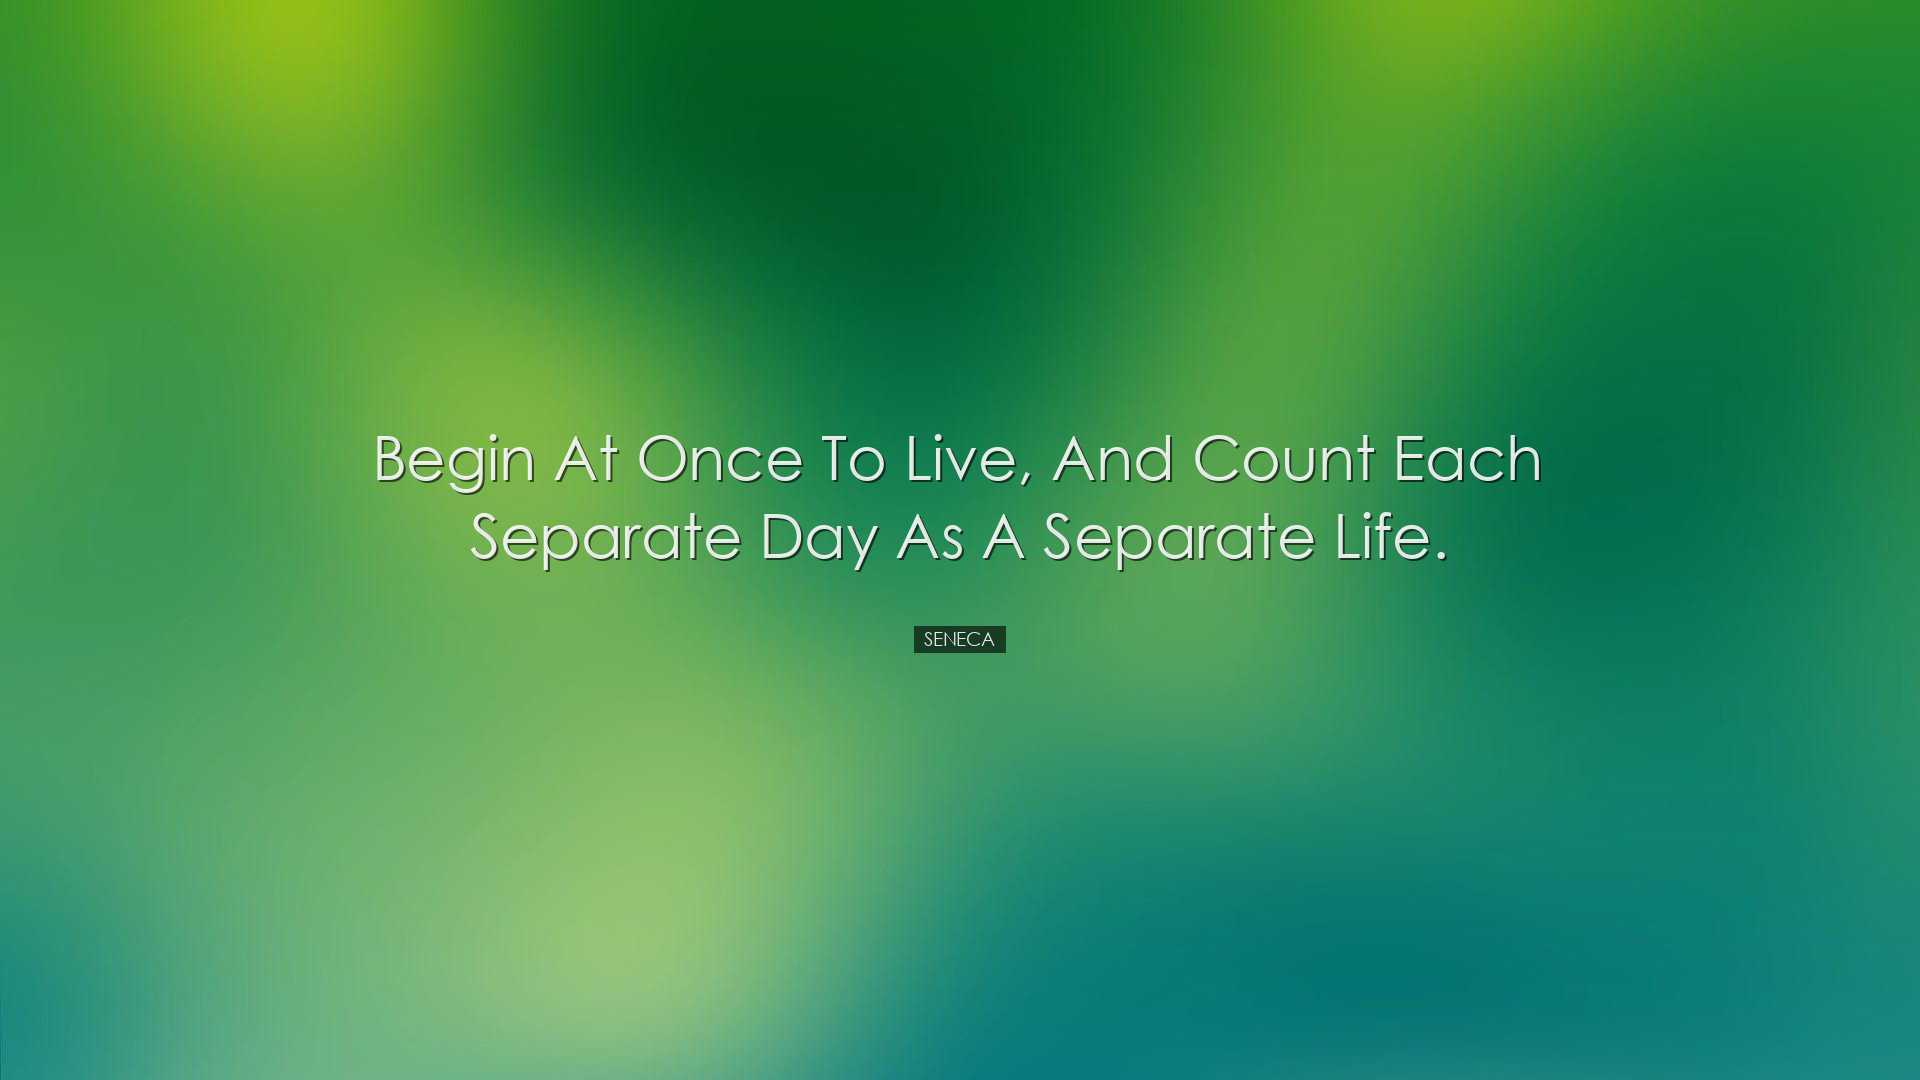 Begin at once to live, and count each separate day as a separate l